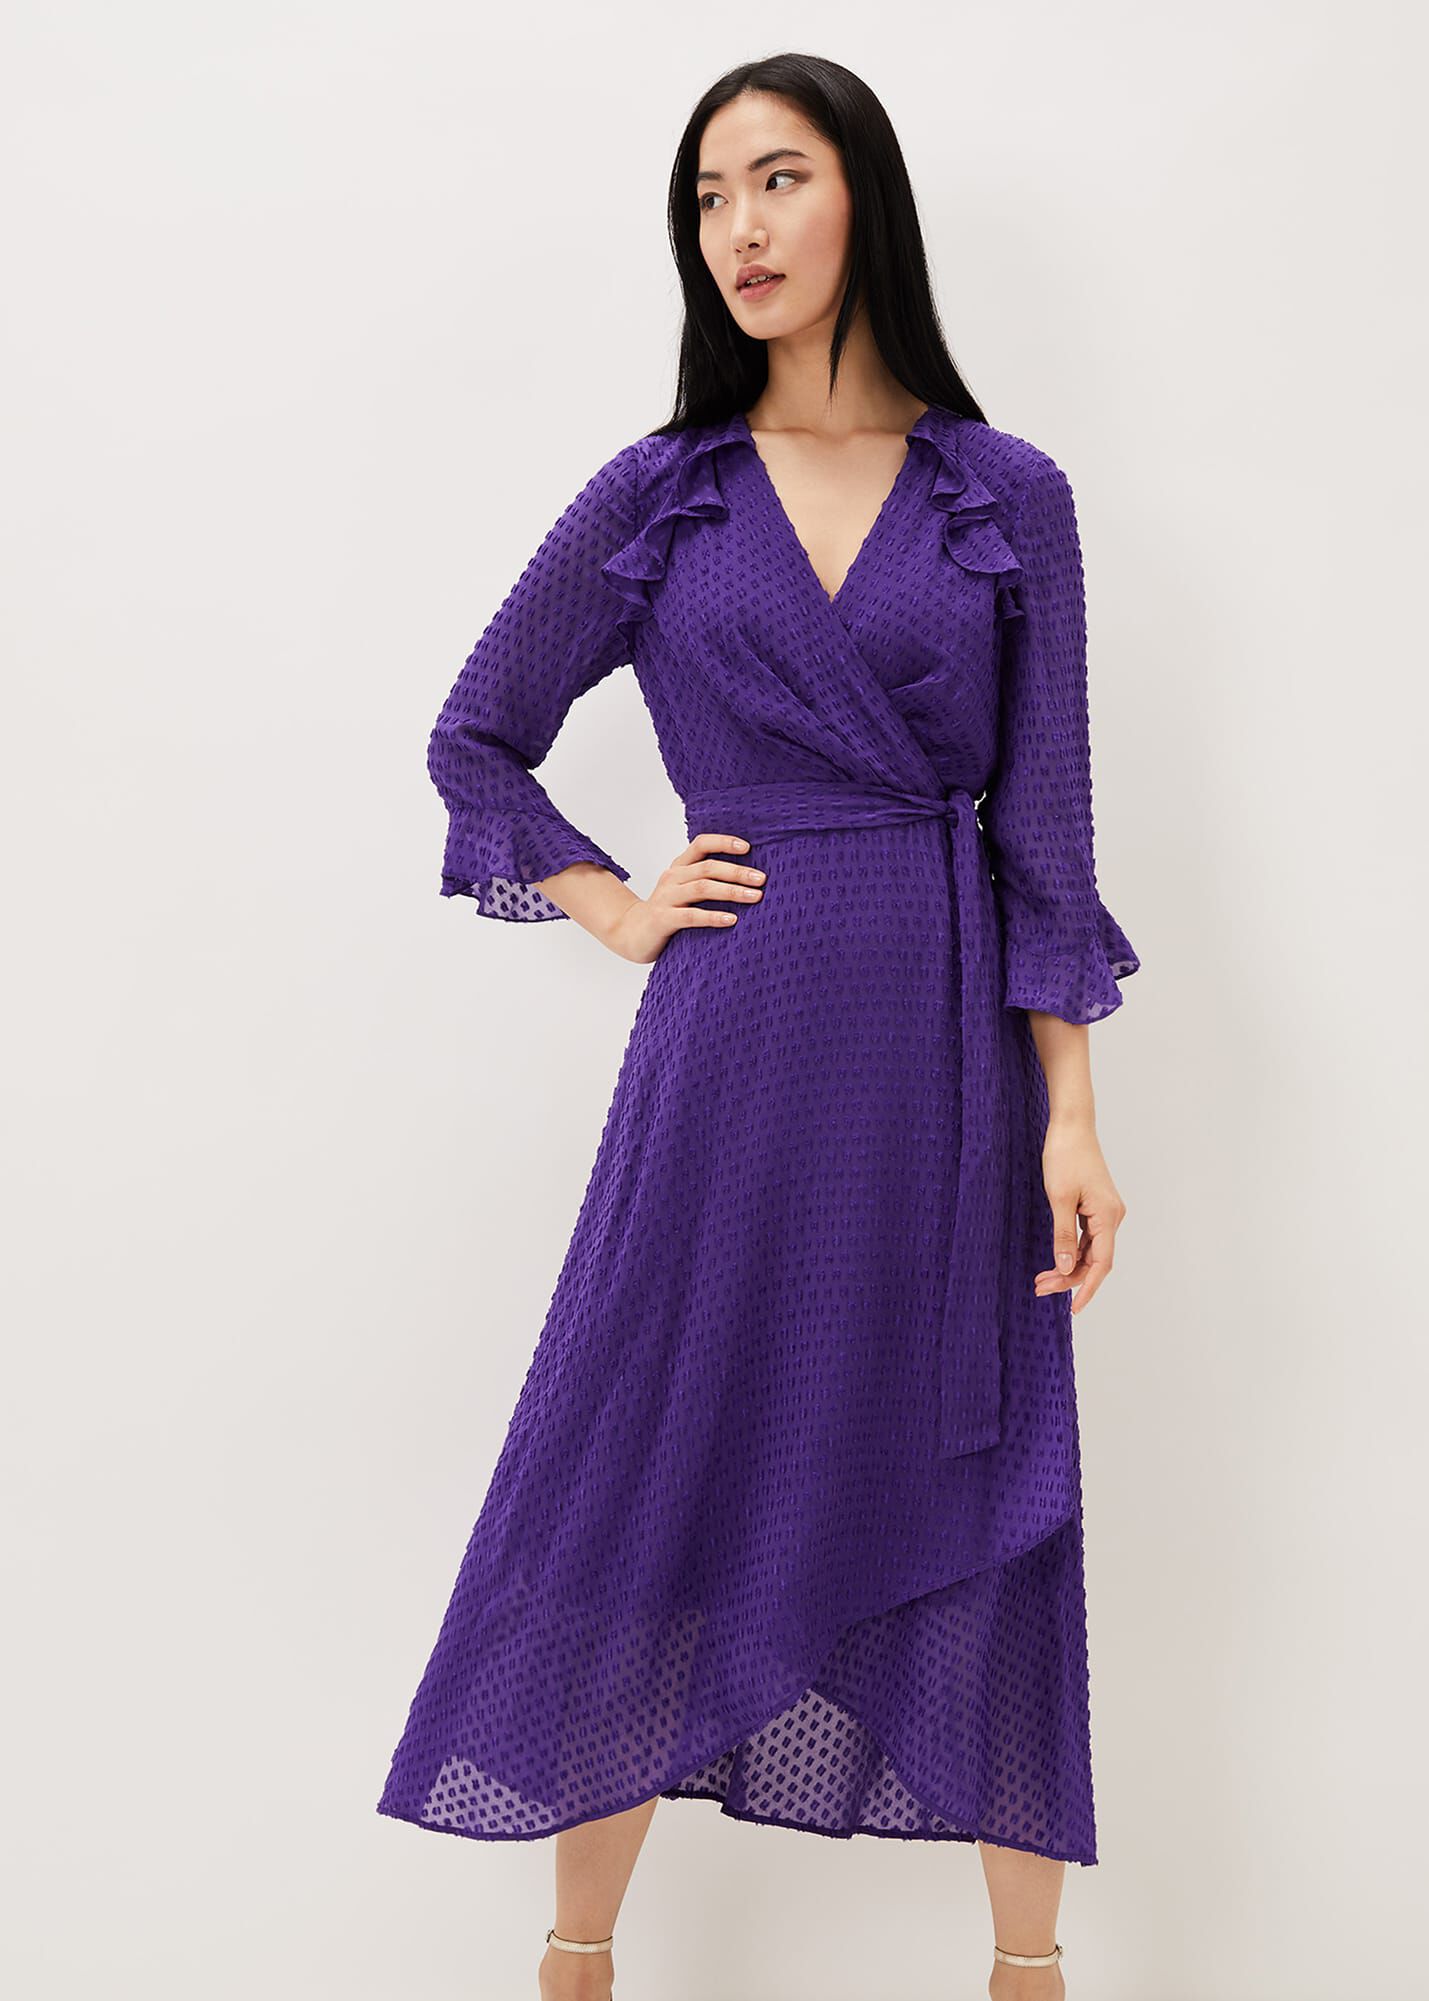 Dresses With Sleeves | Phase Eight